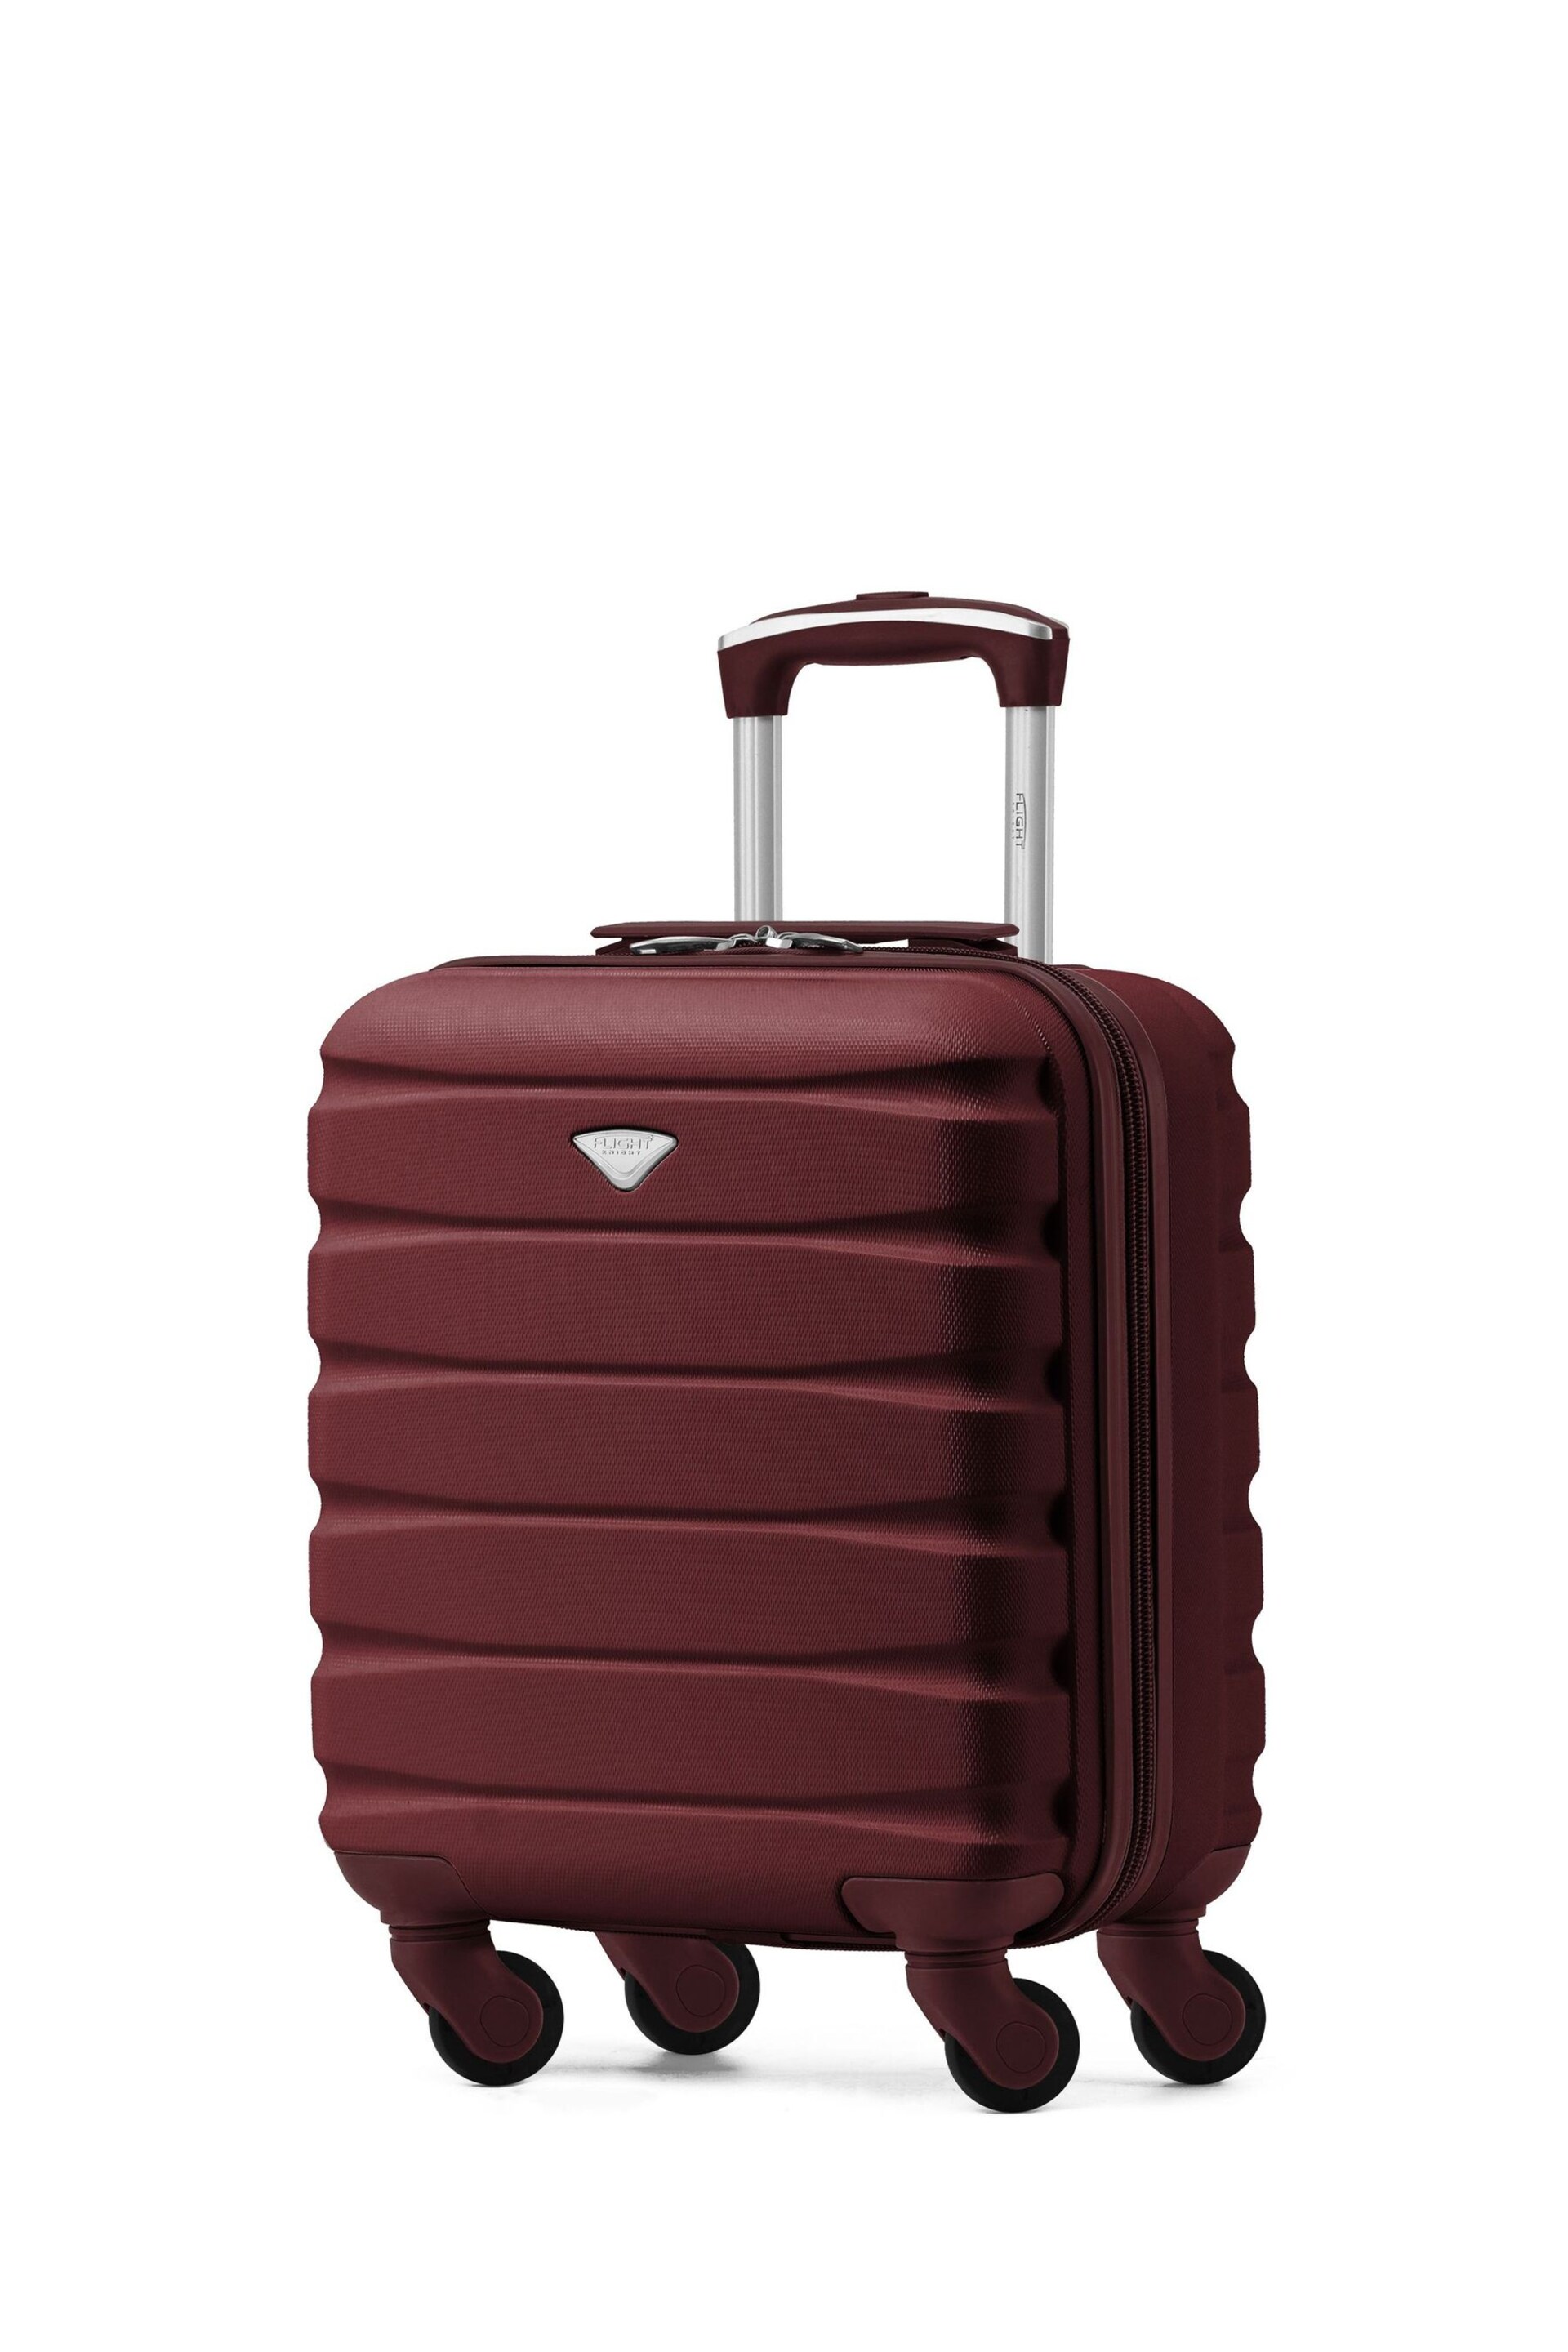 Flight Knight 45x36x20cm EasyJet Underseat 4 Wheel ABS Hard Case Cabin Carry On Hand Luggage - Image 1 of 7